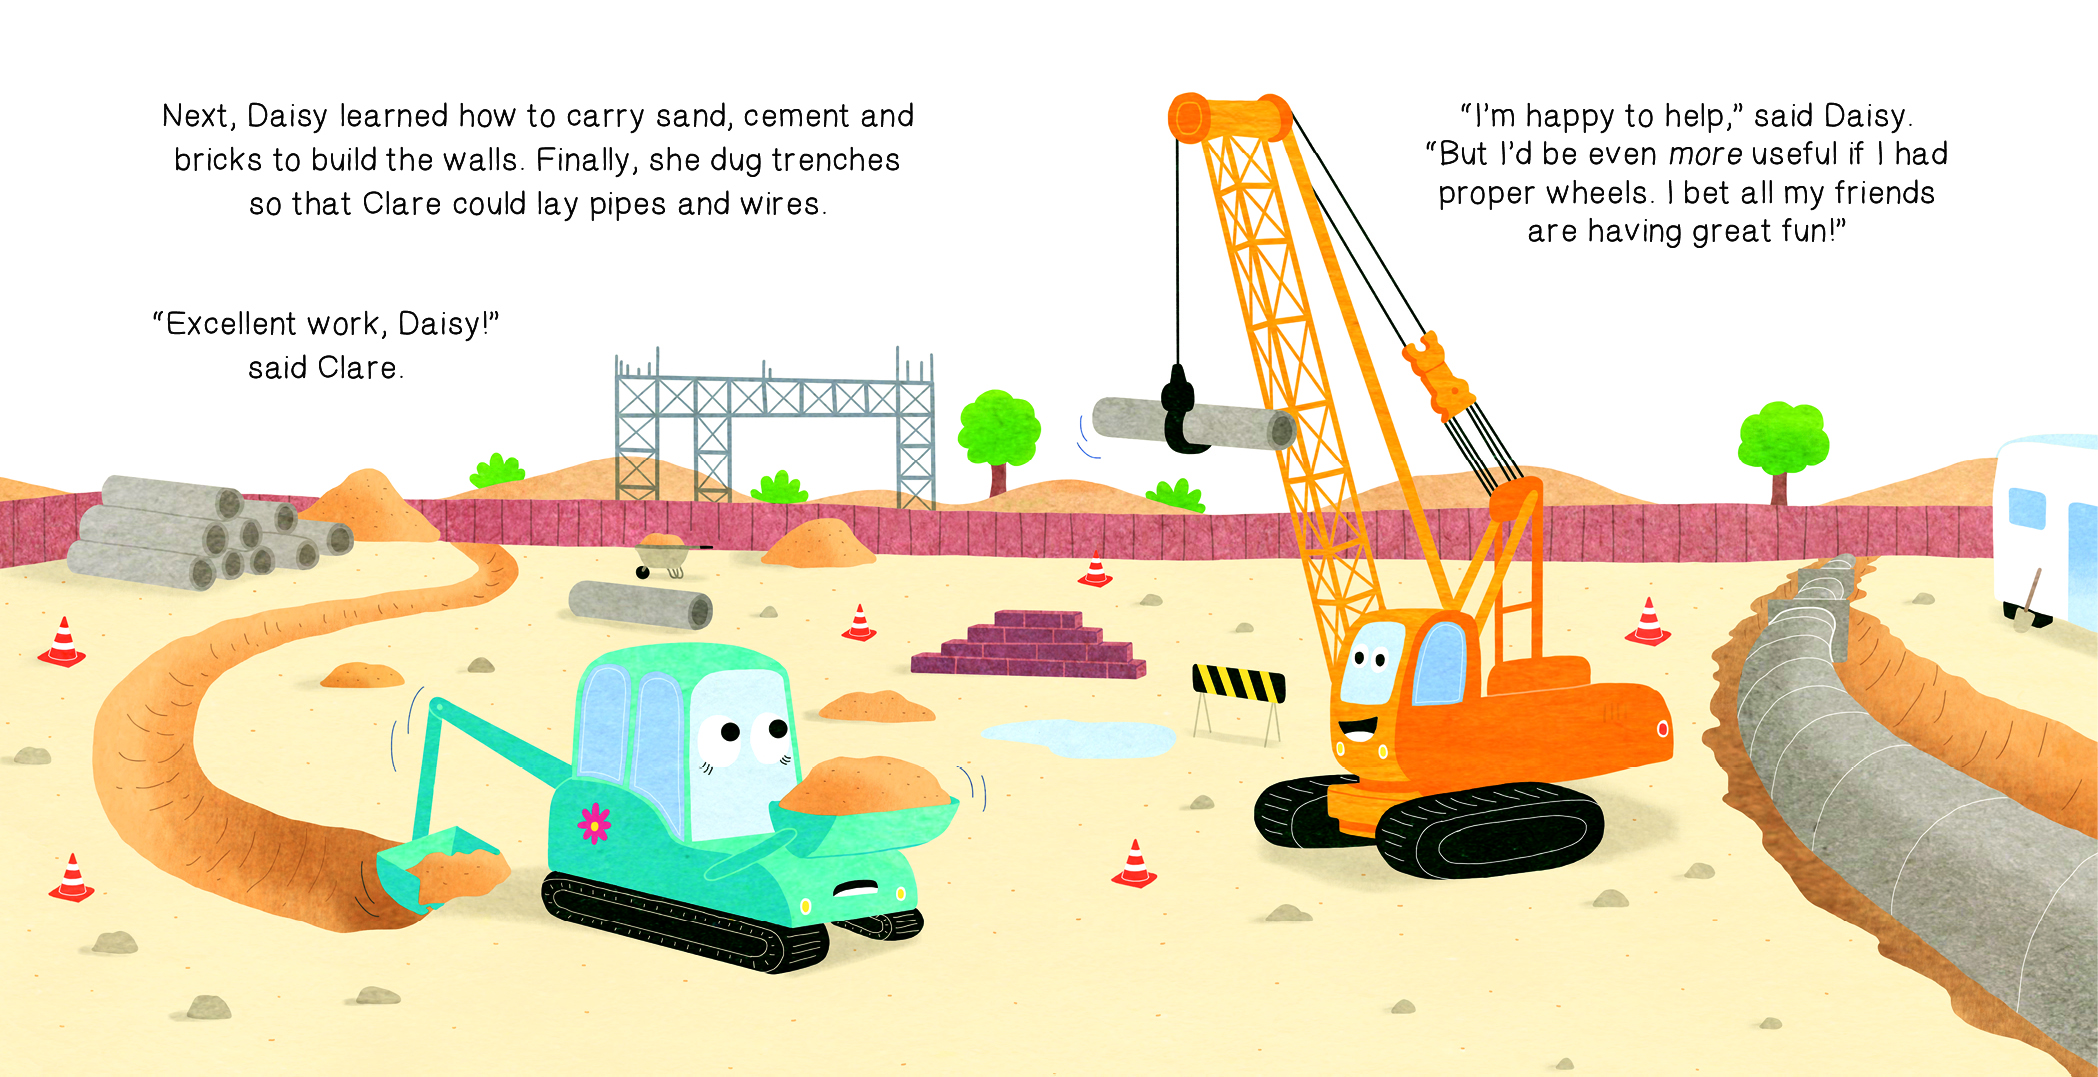 Whizzy Wheels Academy: Daisy the Digger (Lerner edition)